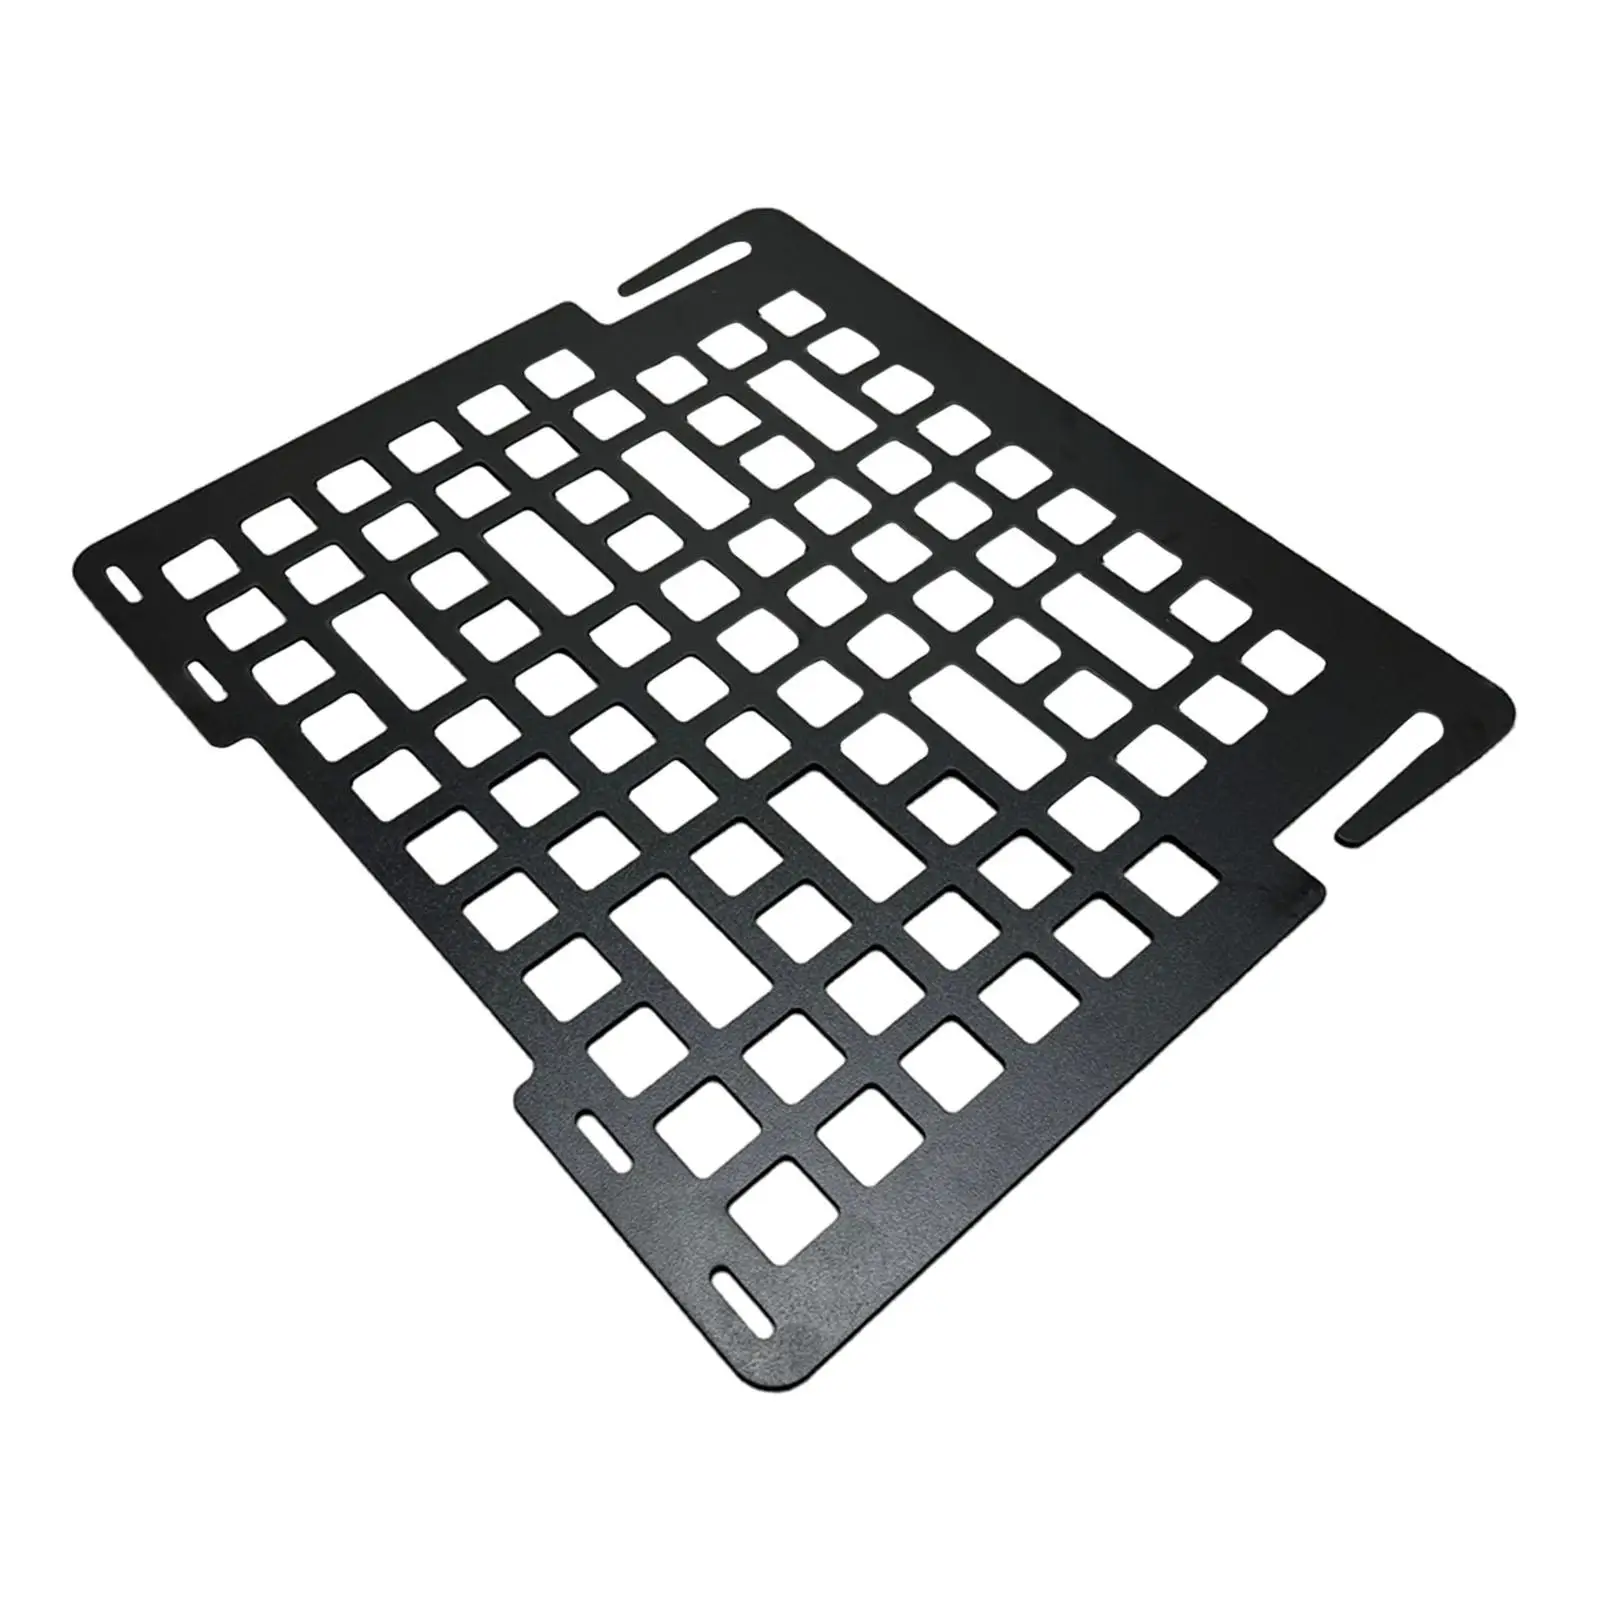 Outdoor Chair Expansion Panel, Folding Chair Extension Panel, Backrest Expansion Board for Park, Lawn, Garden, Director Chair